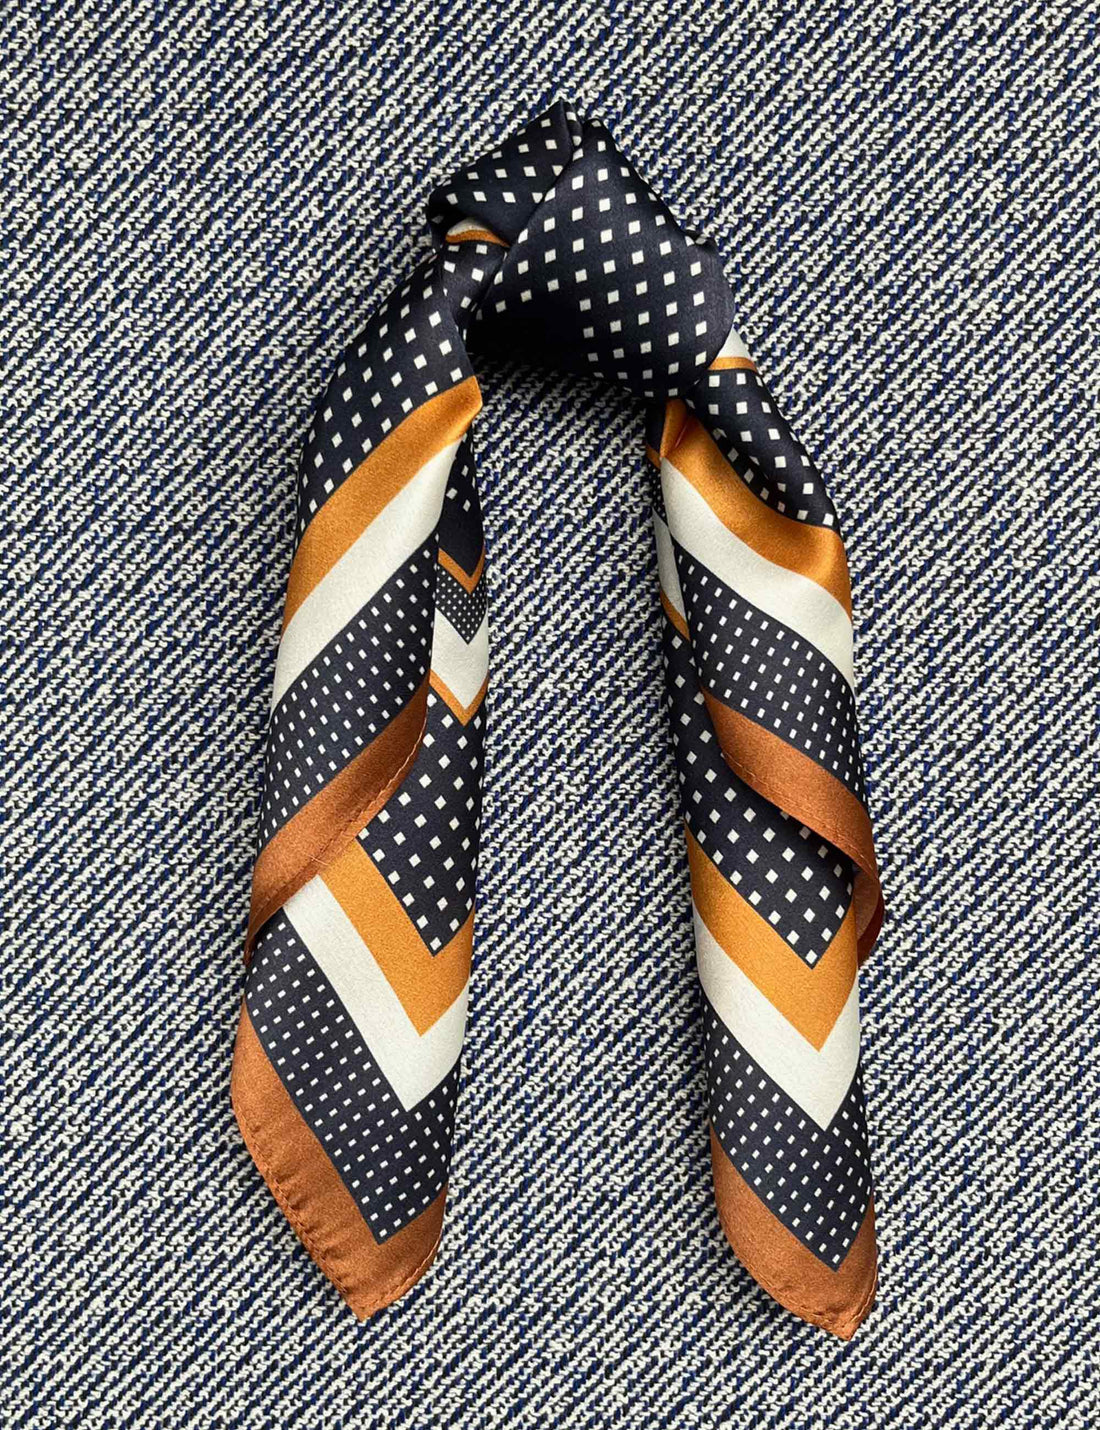 Silk scarf navy/white/rust dots and stripes